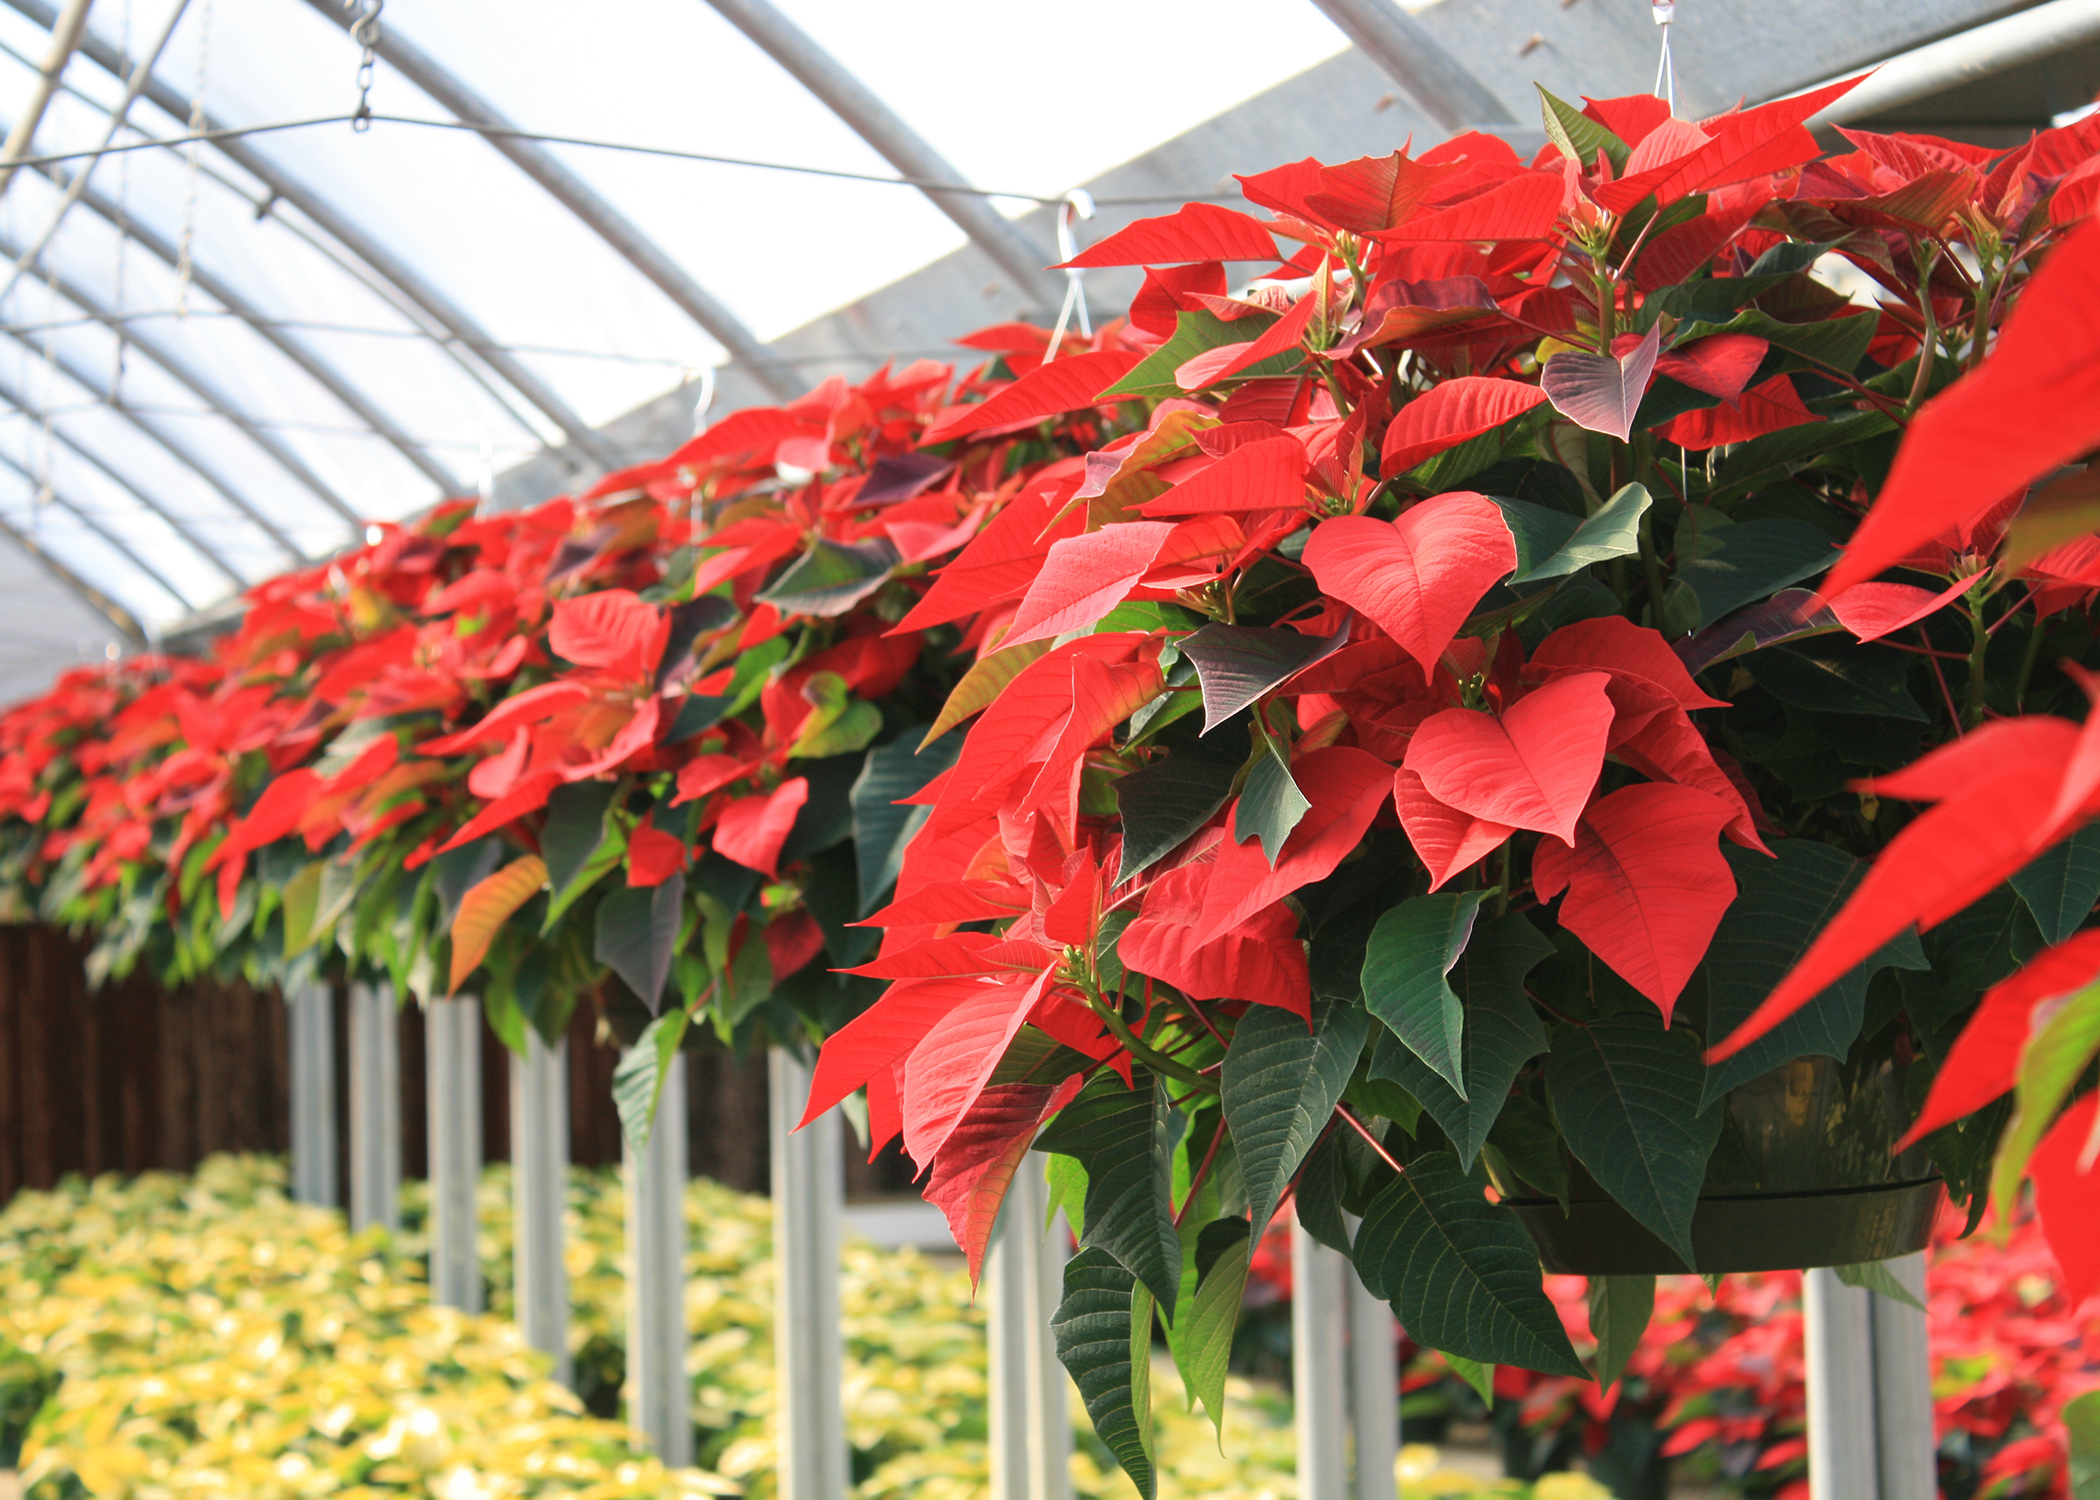 The appearance of poinsettias means we are in the full swing of the Christmas season. (Photo by MSU Extension/Gary Bachman)